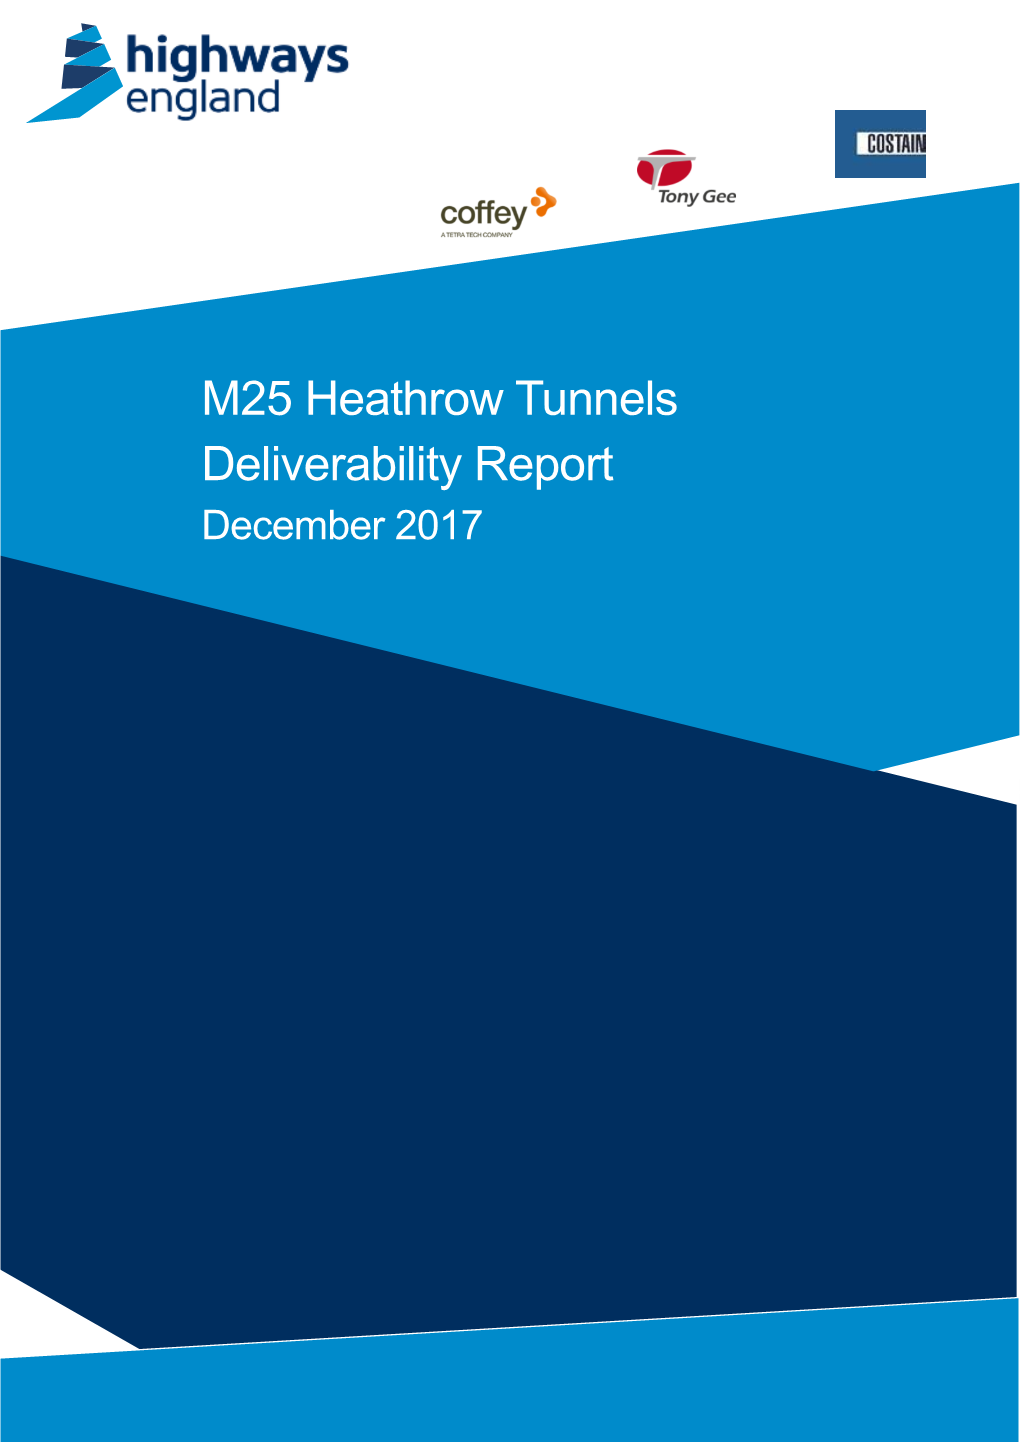 M25 Heathrow Tunnels Deliverability Report